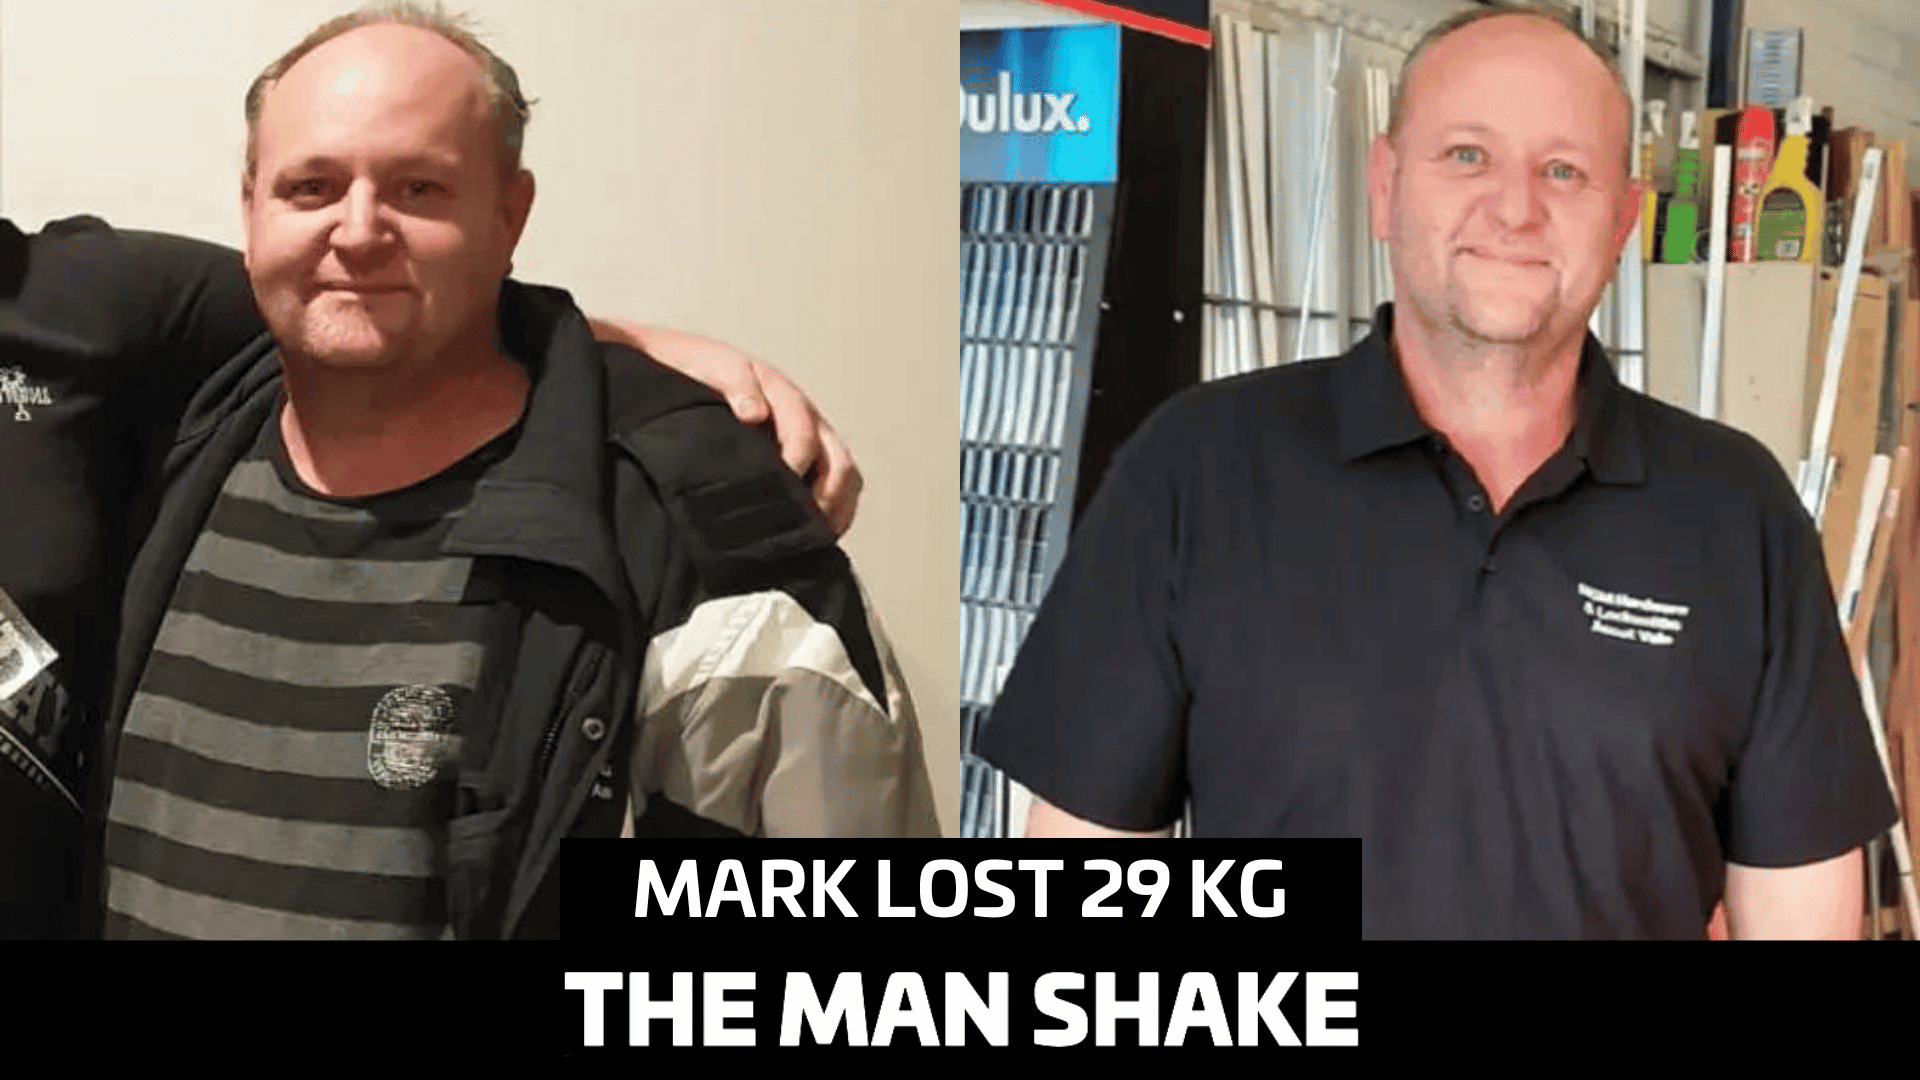 Mark's heart couldn't take it so he lost 29kg